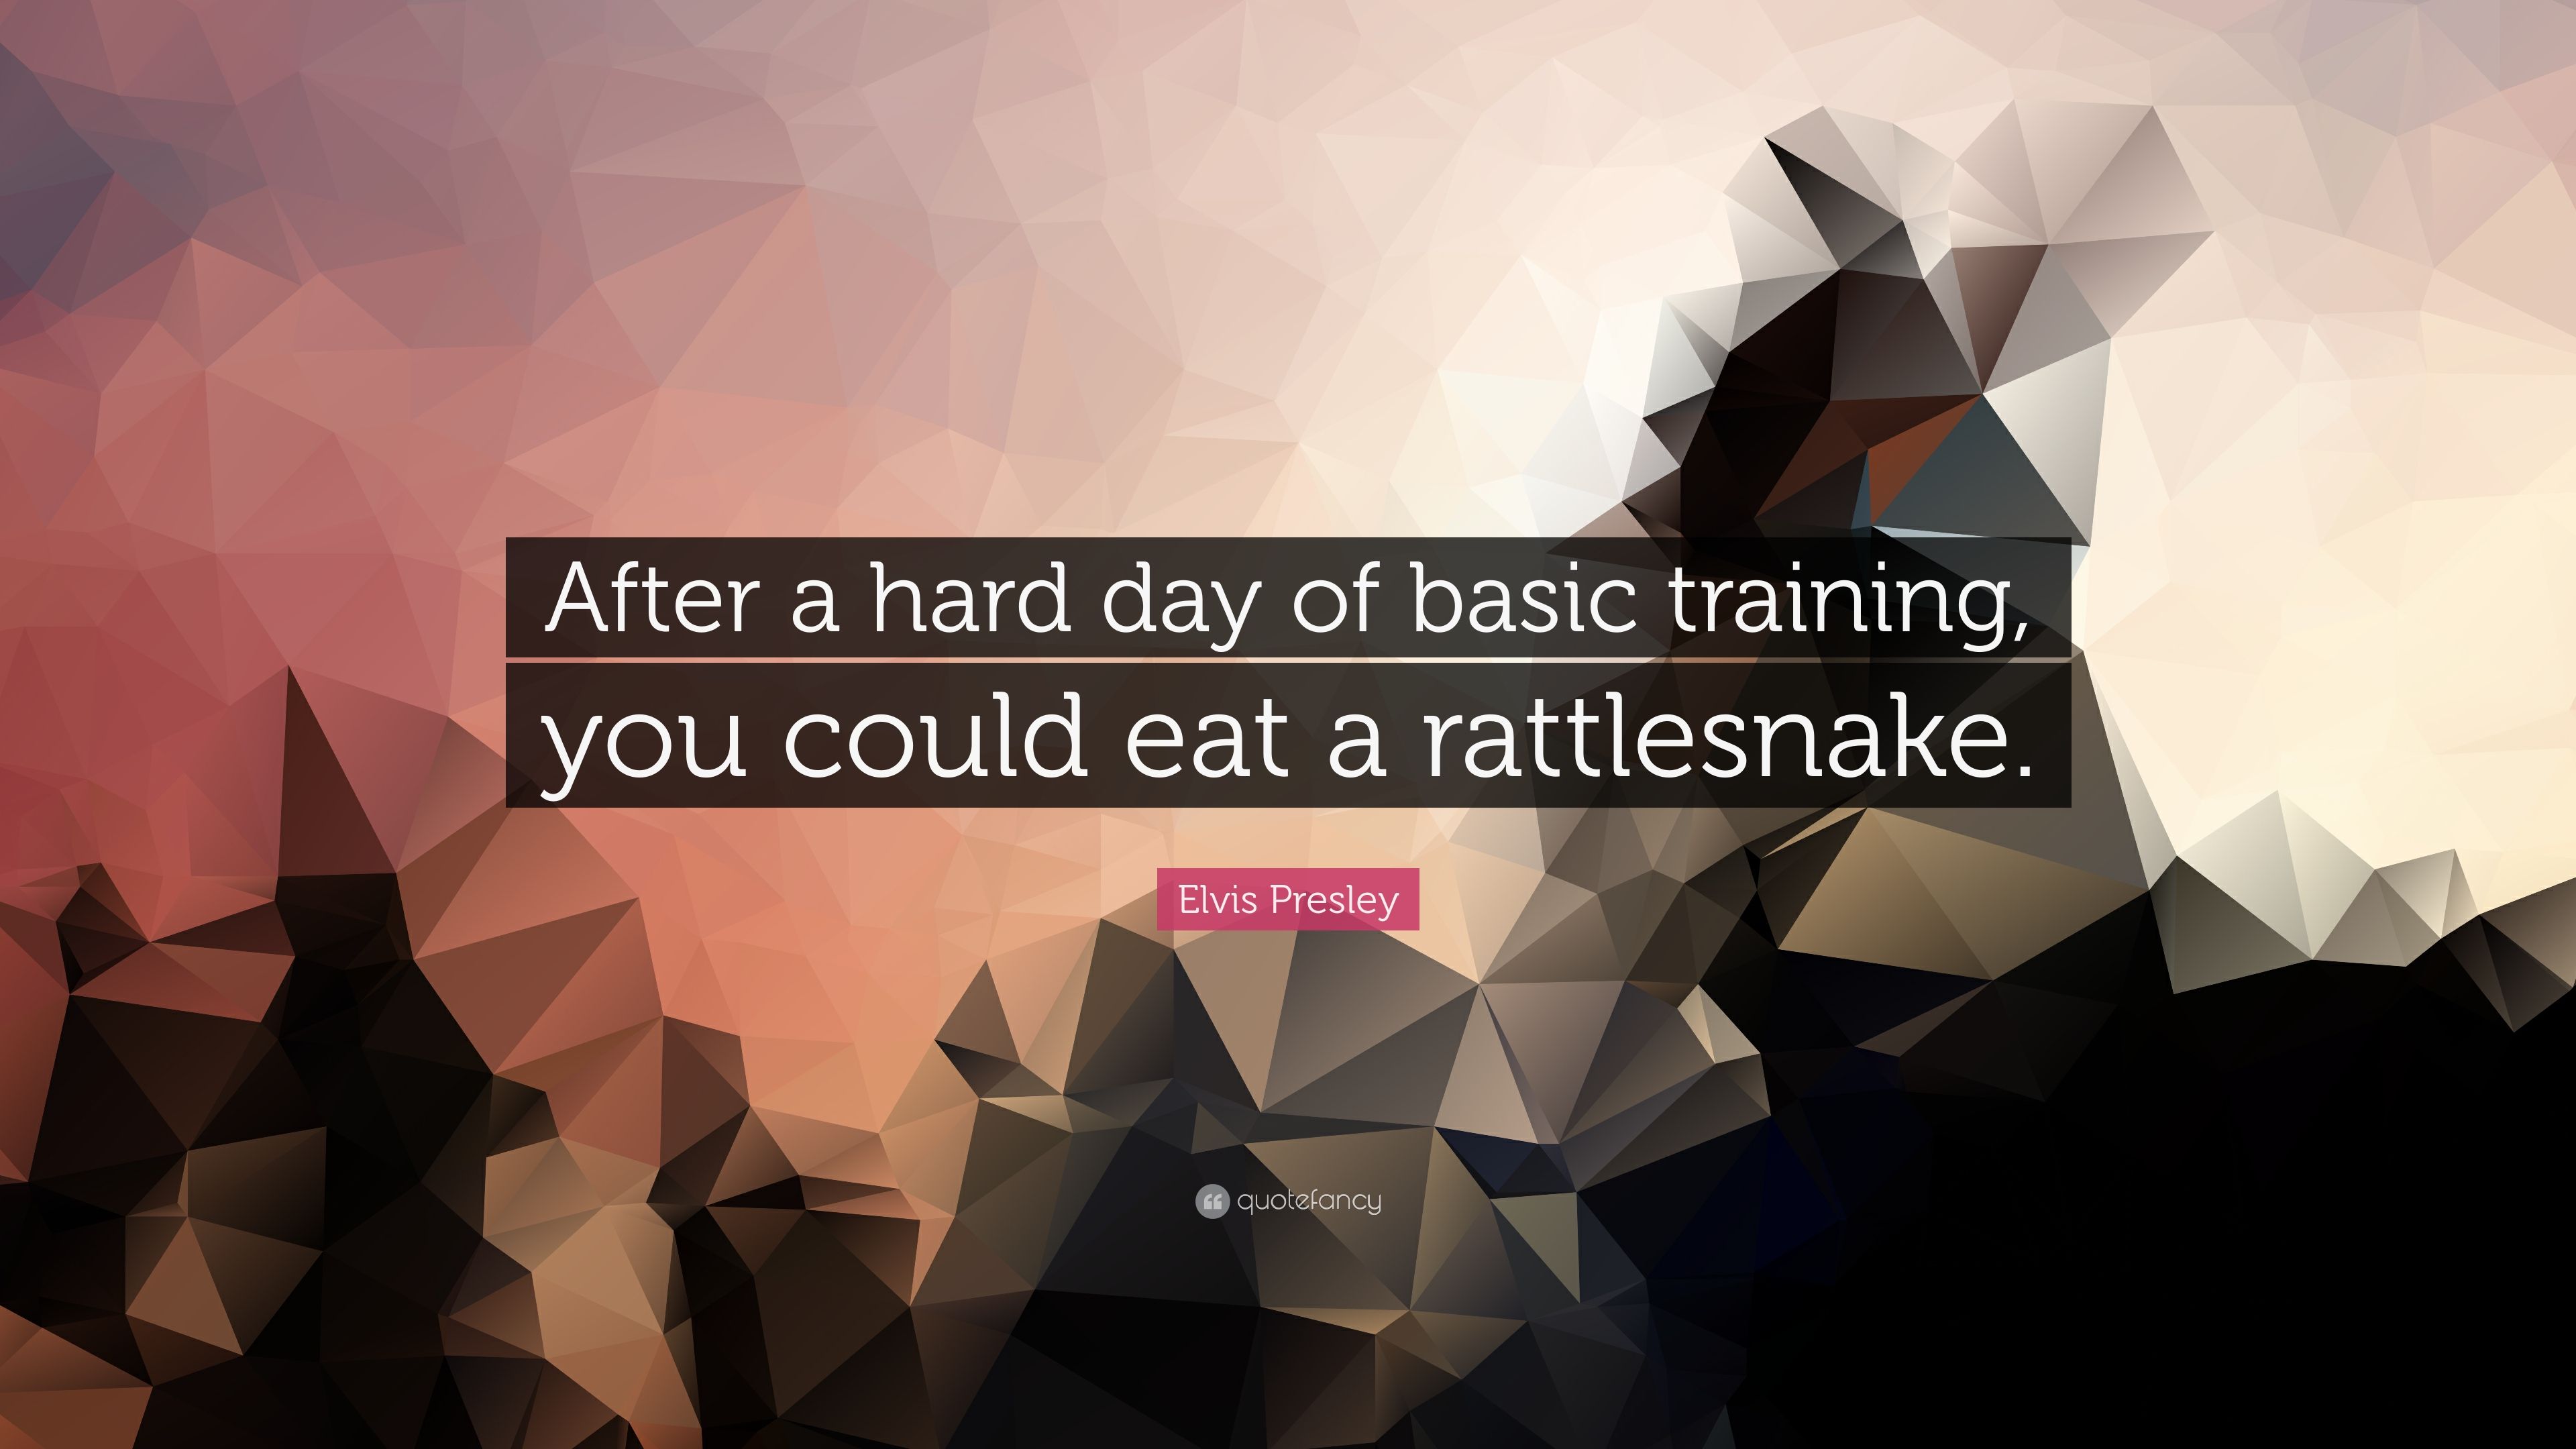 Elvis Presley Quote: “After a hard day of basic training, you